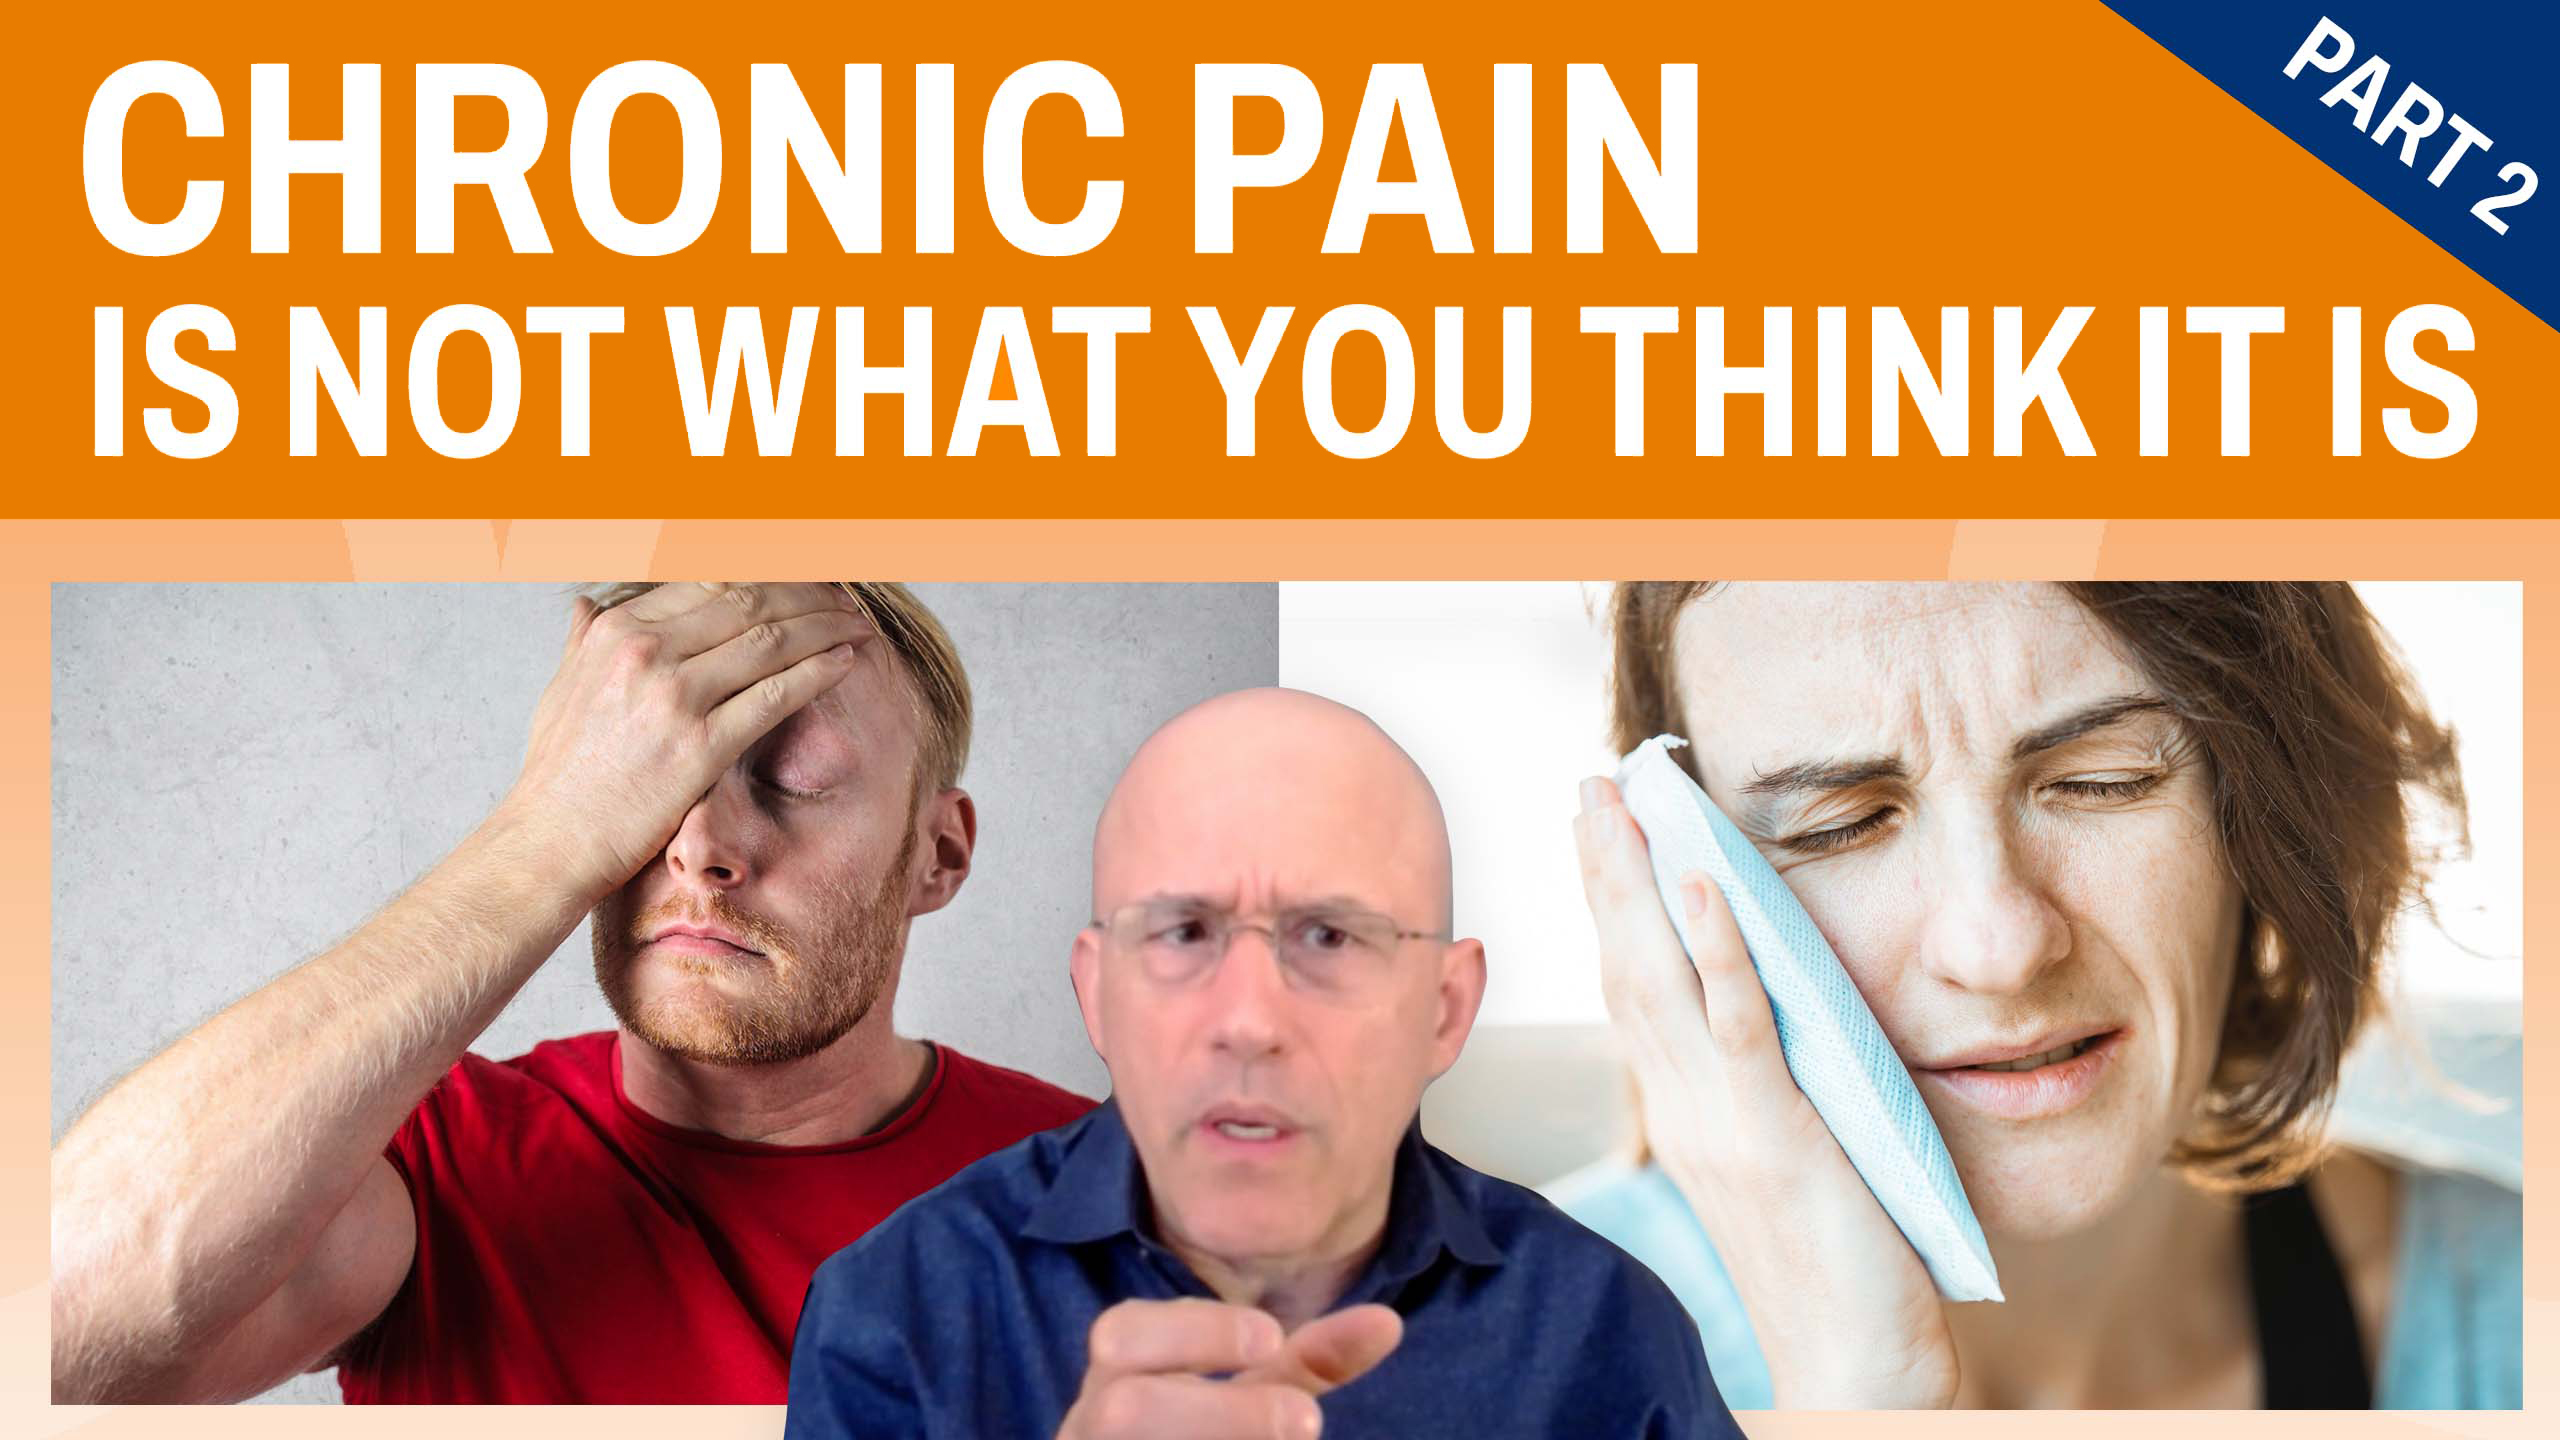 Chronic pain is not what you think